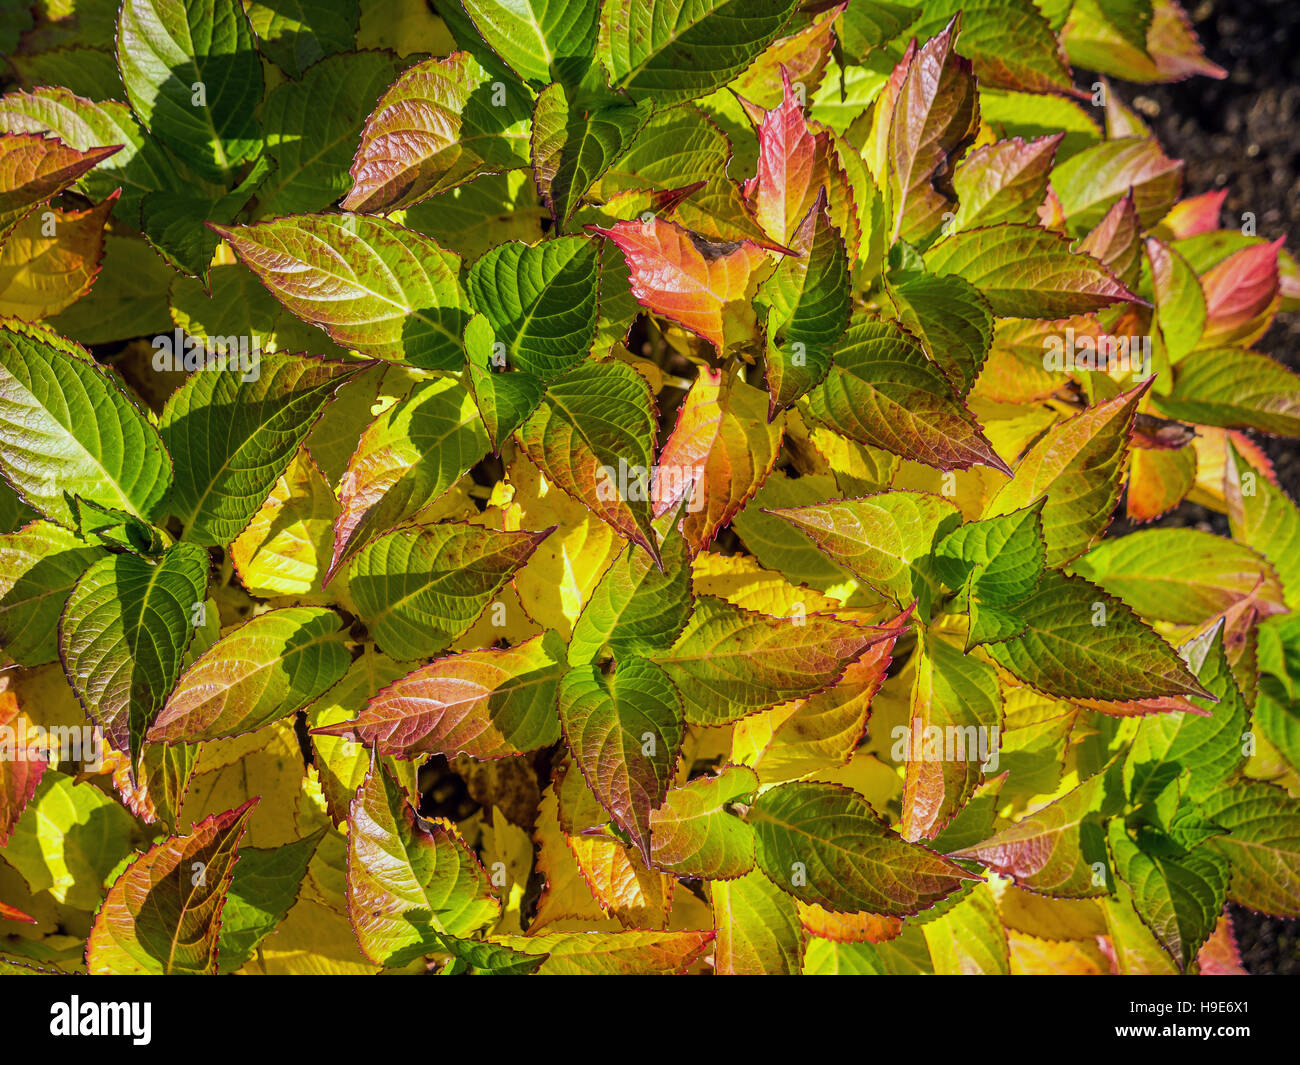 Closeup of Smooth Hydrangea leaves in fall time colors Stock Photo